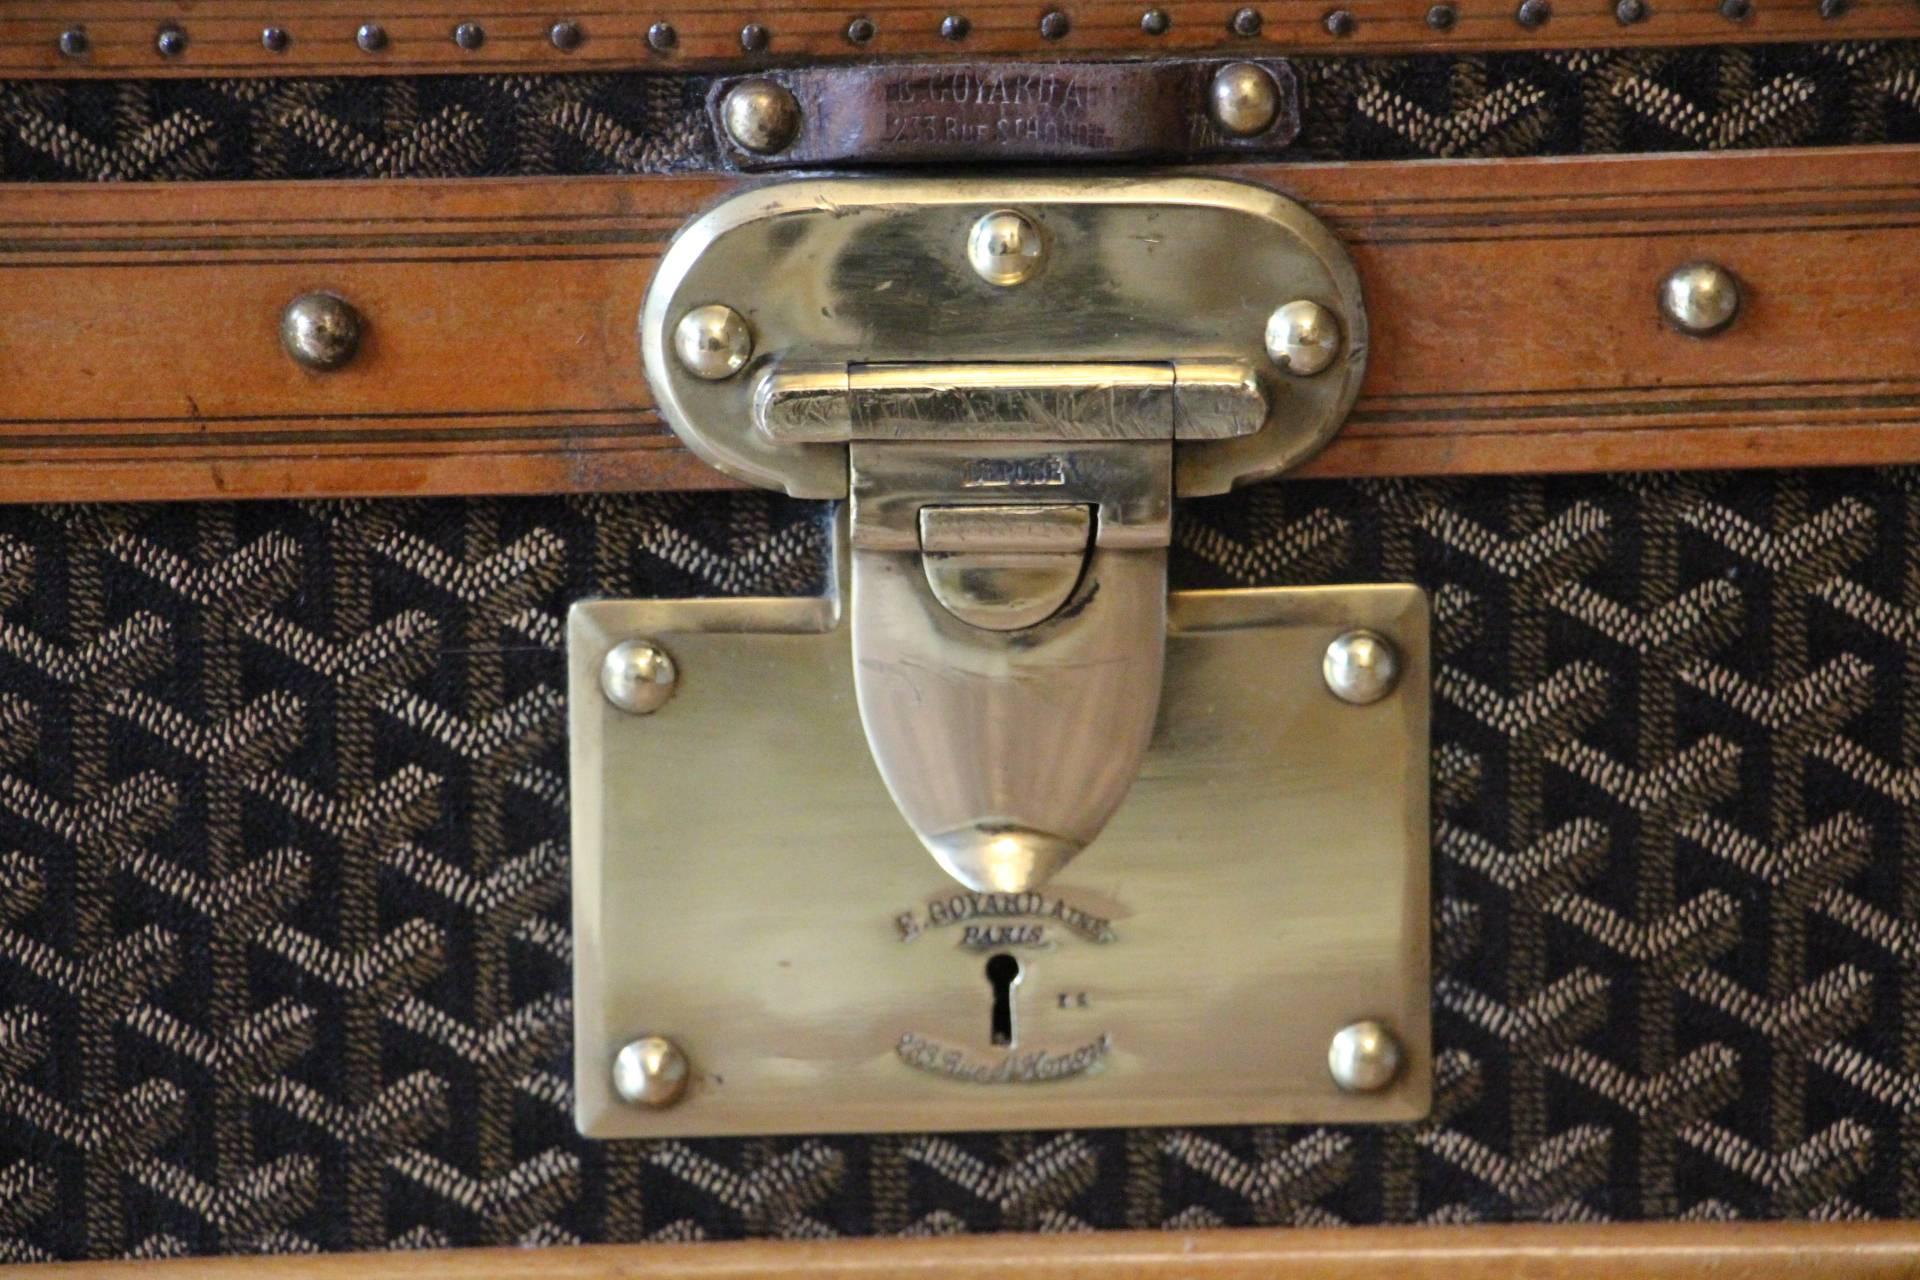 This Aine Goyard trunk has got very nice and unusual proportions as well as a beautiful, warm patina.
It features its famous and sought after chevron canvas, its original brass stamped lock, brass stamped clasps and brass stamped handles.
It still